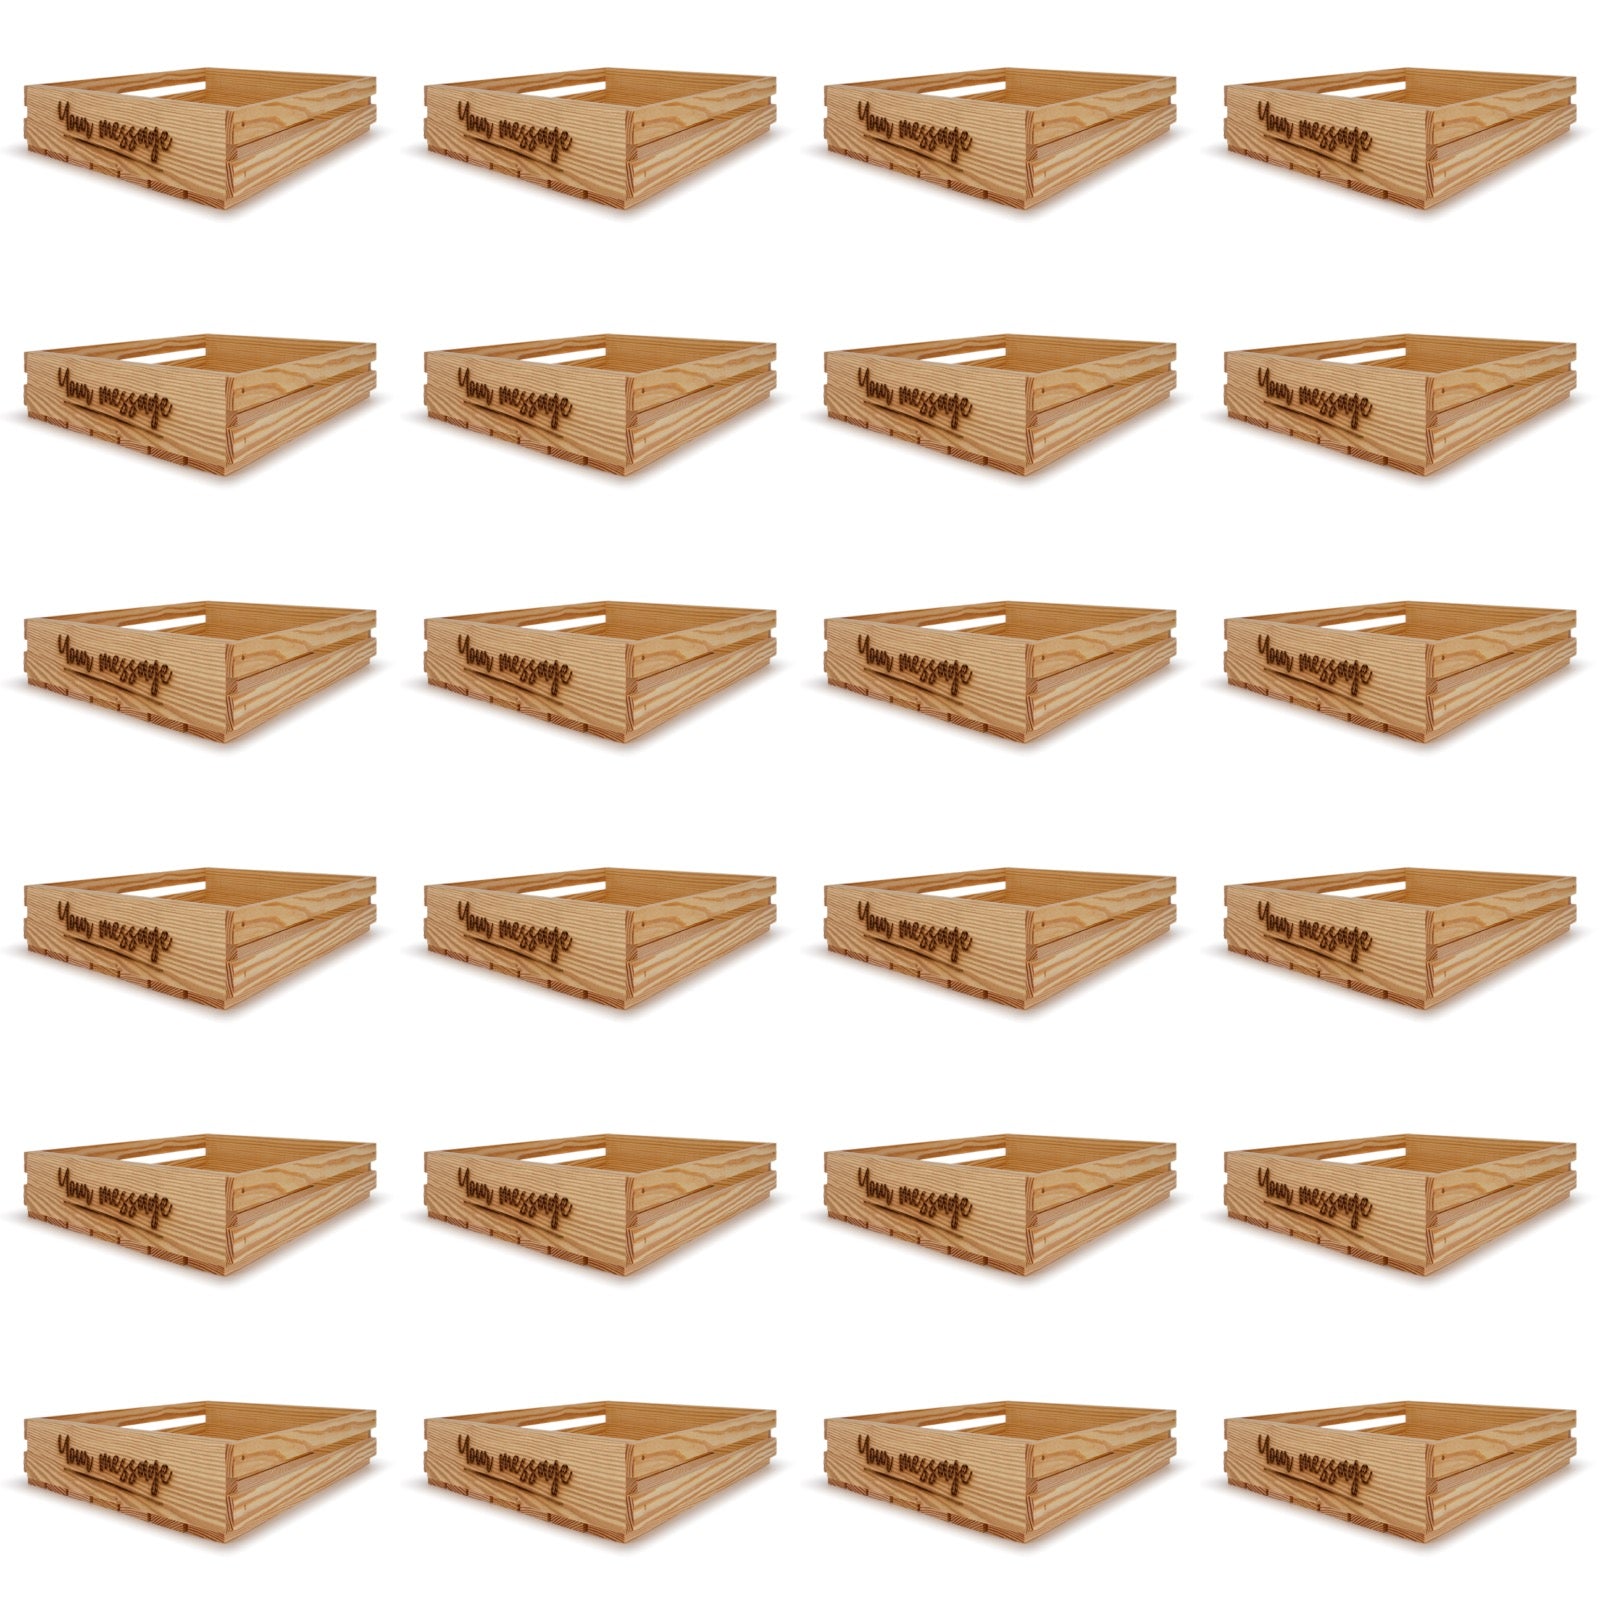 24 Small wooden crates 16x14x3.5 your message included